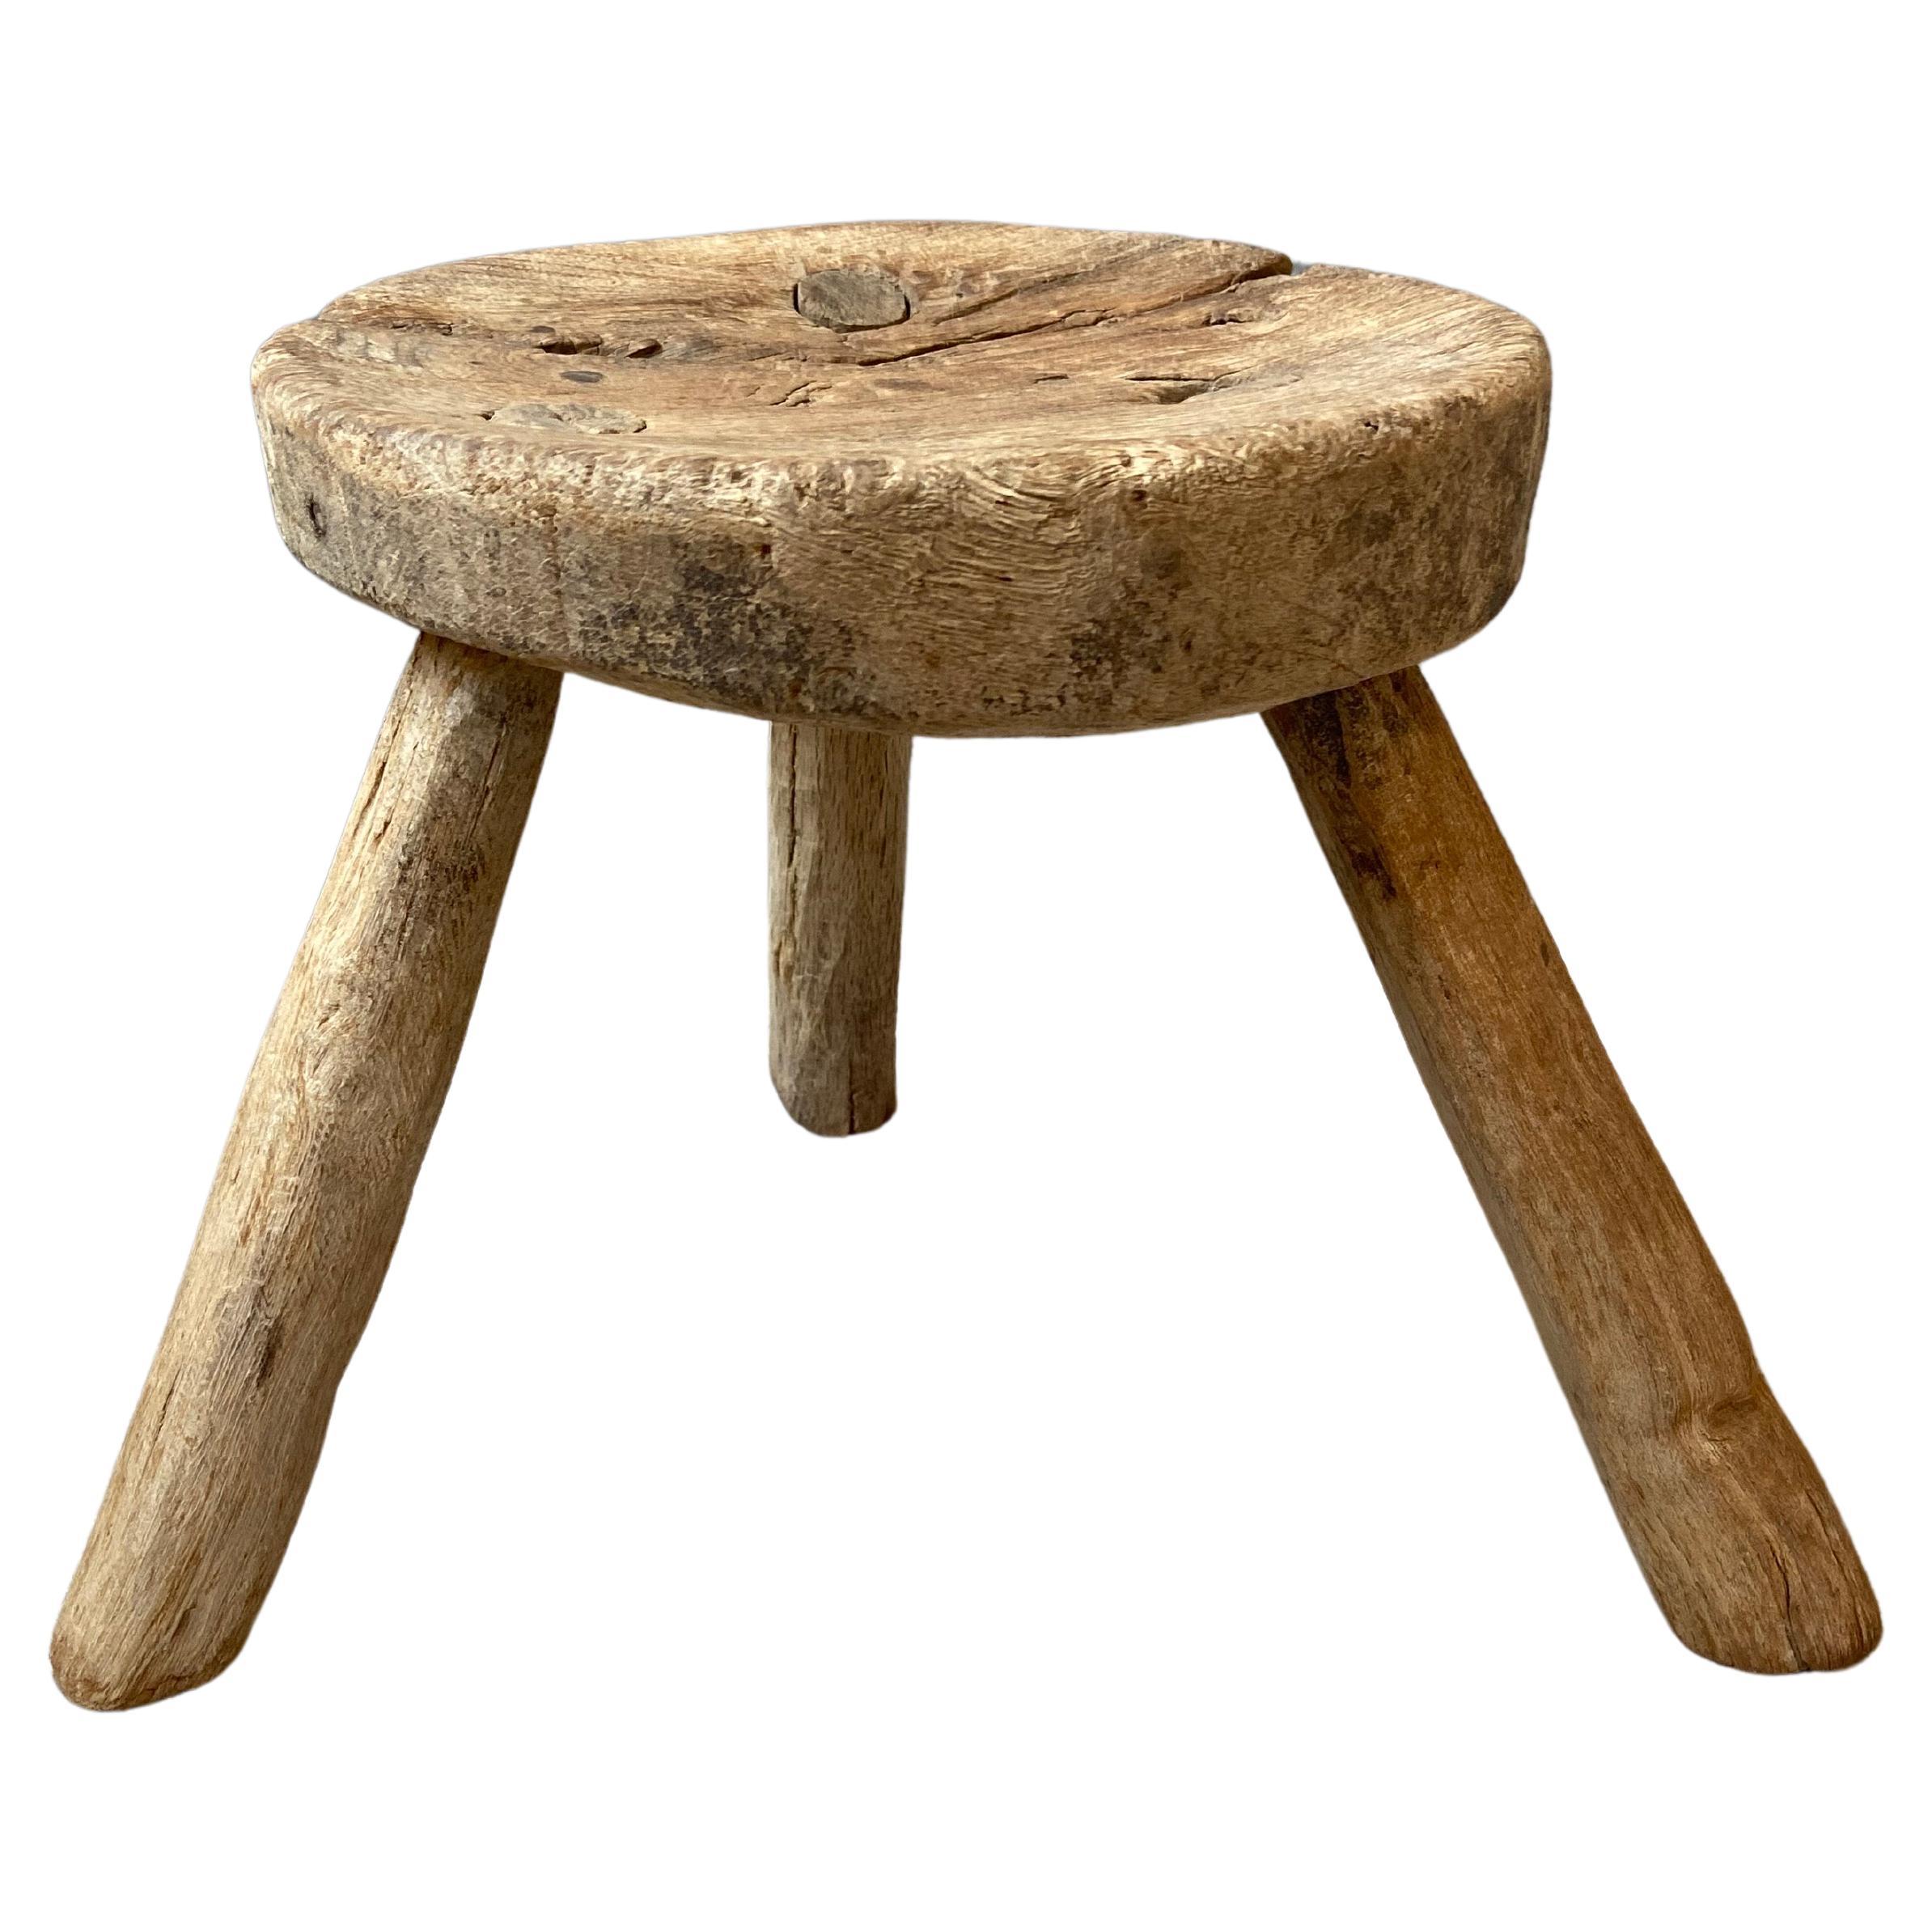 Mesquite Hardwood Stool From Guanajuato, Mexico, Circa 1940´s For Sale